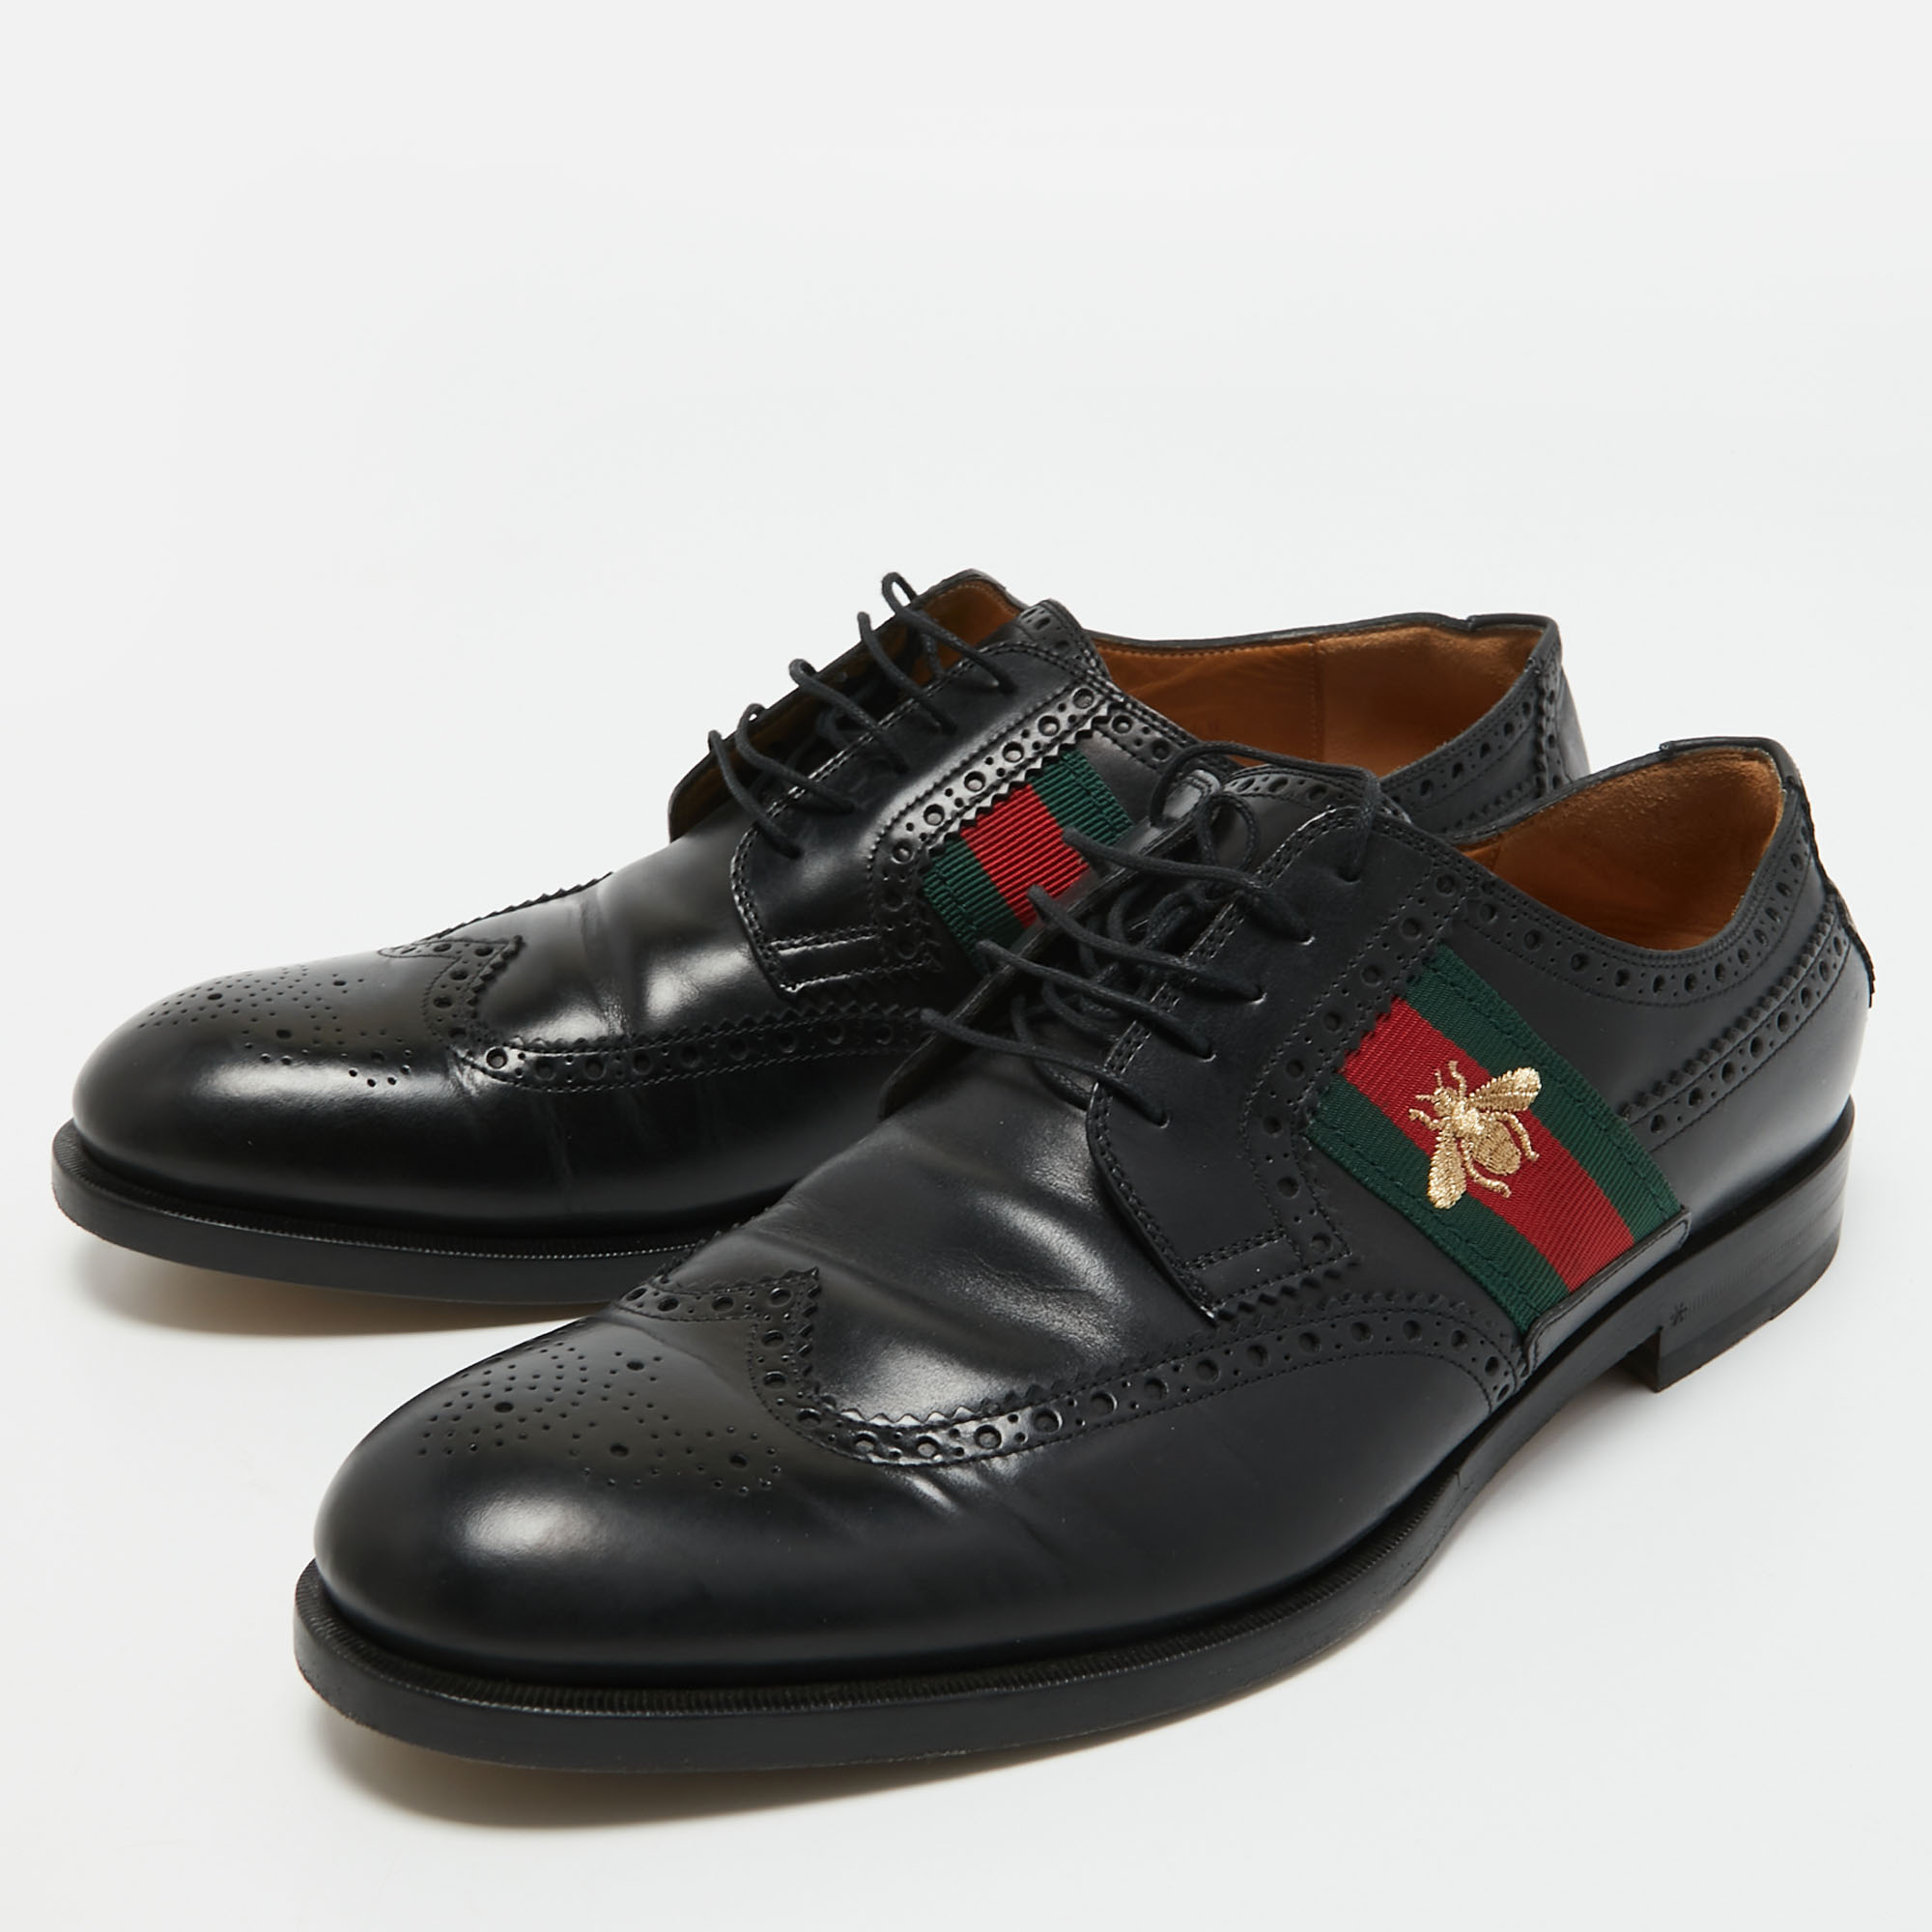 

Gucci Black Brogue Leather Bee Web Detail Lace Up Oxfords Size